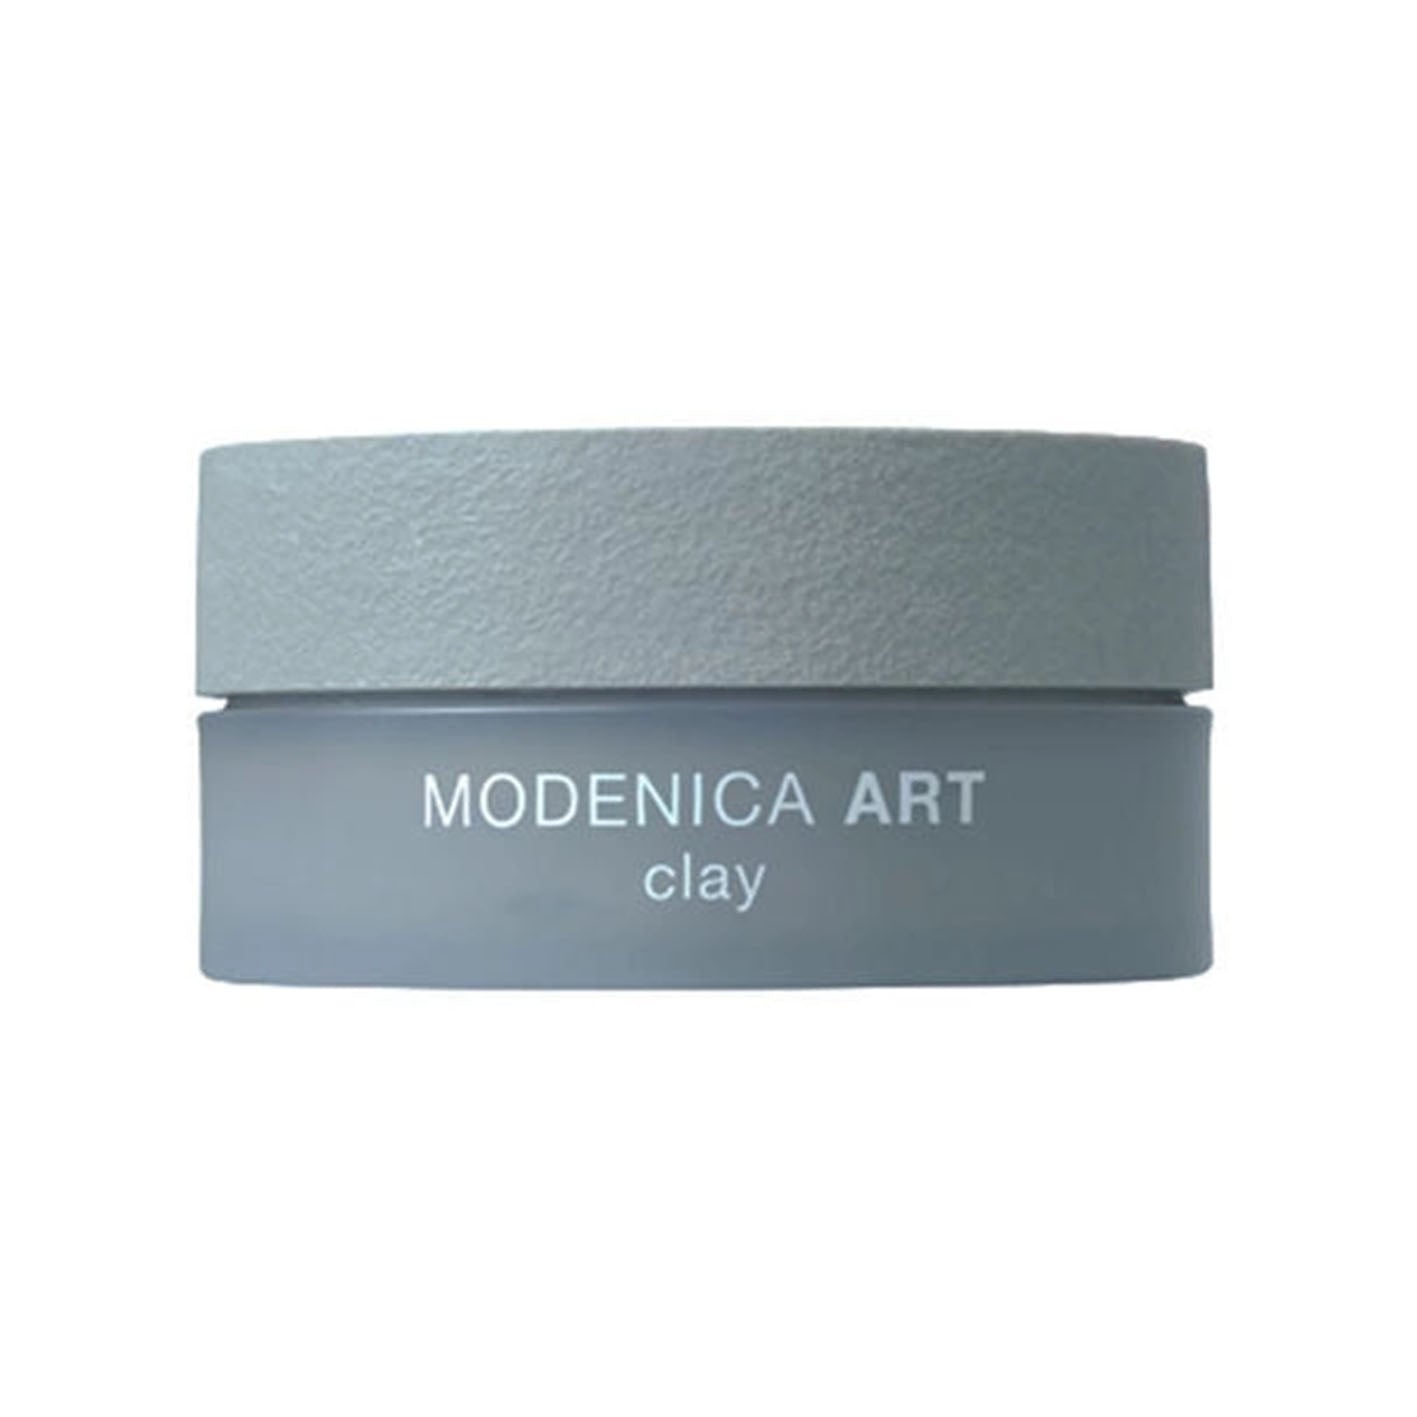 Nakano Modenica Art Clay 60g - Harajuku Culture Japan - Japanease Products Store Beauty and Stationery